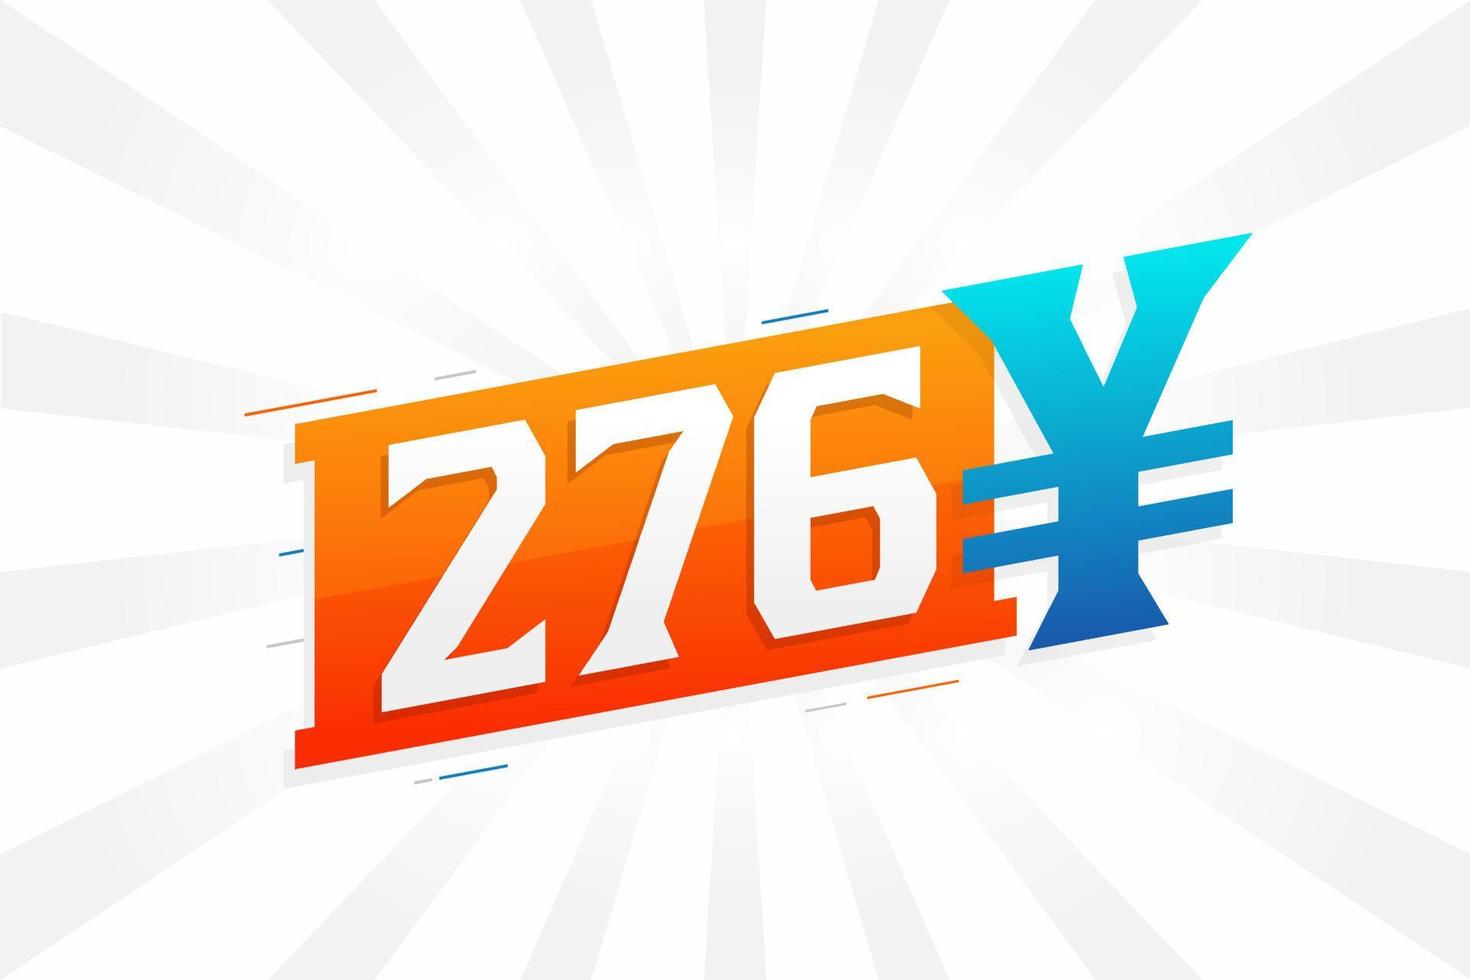 276 Yuan Chinese currency vector text symbol. 276 Yen Japanese currency Money stock vector